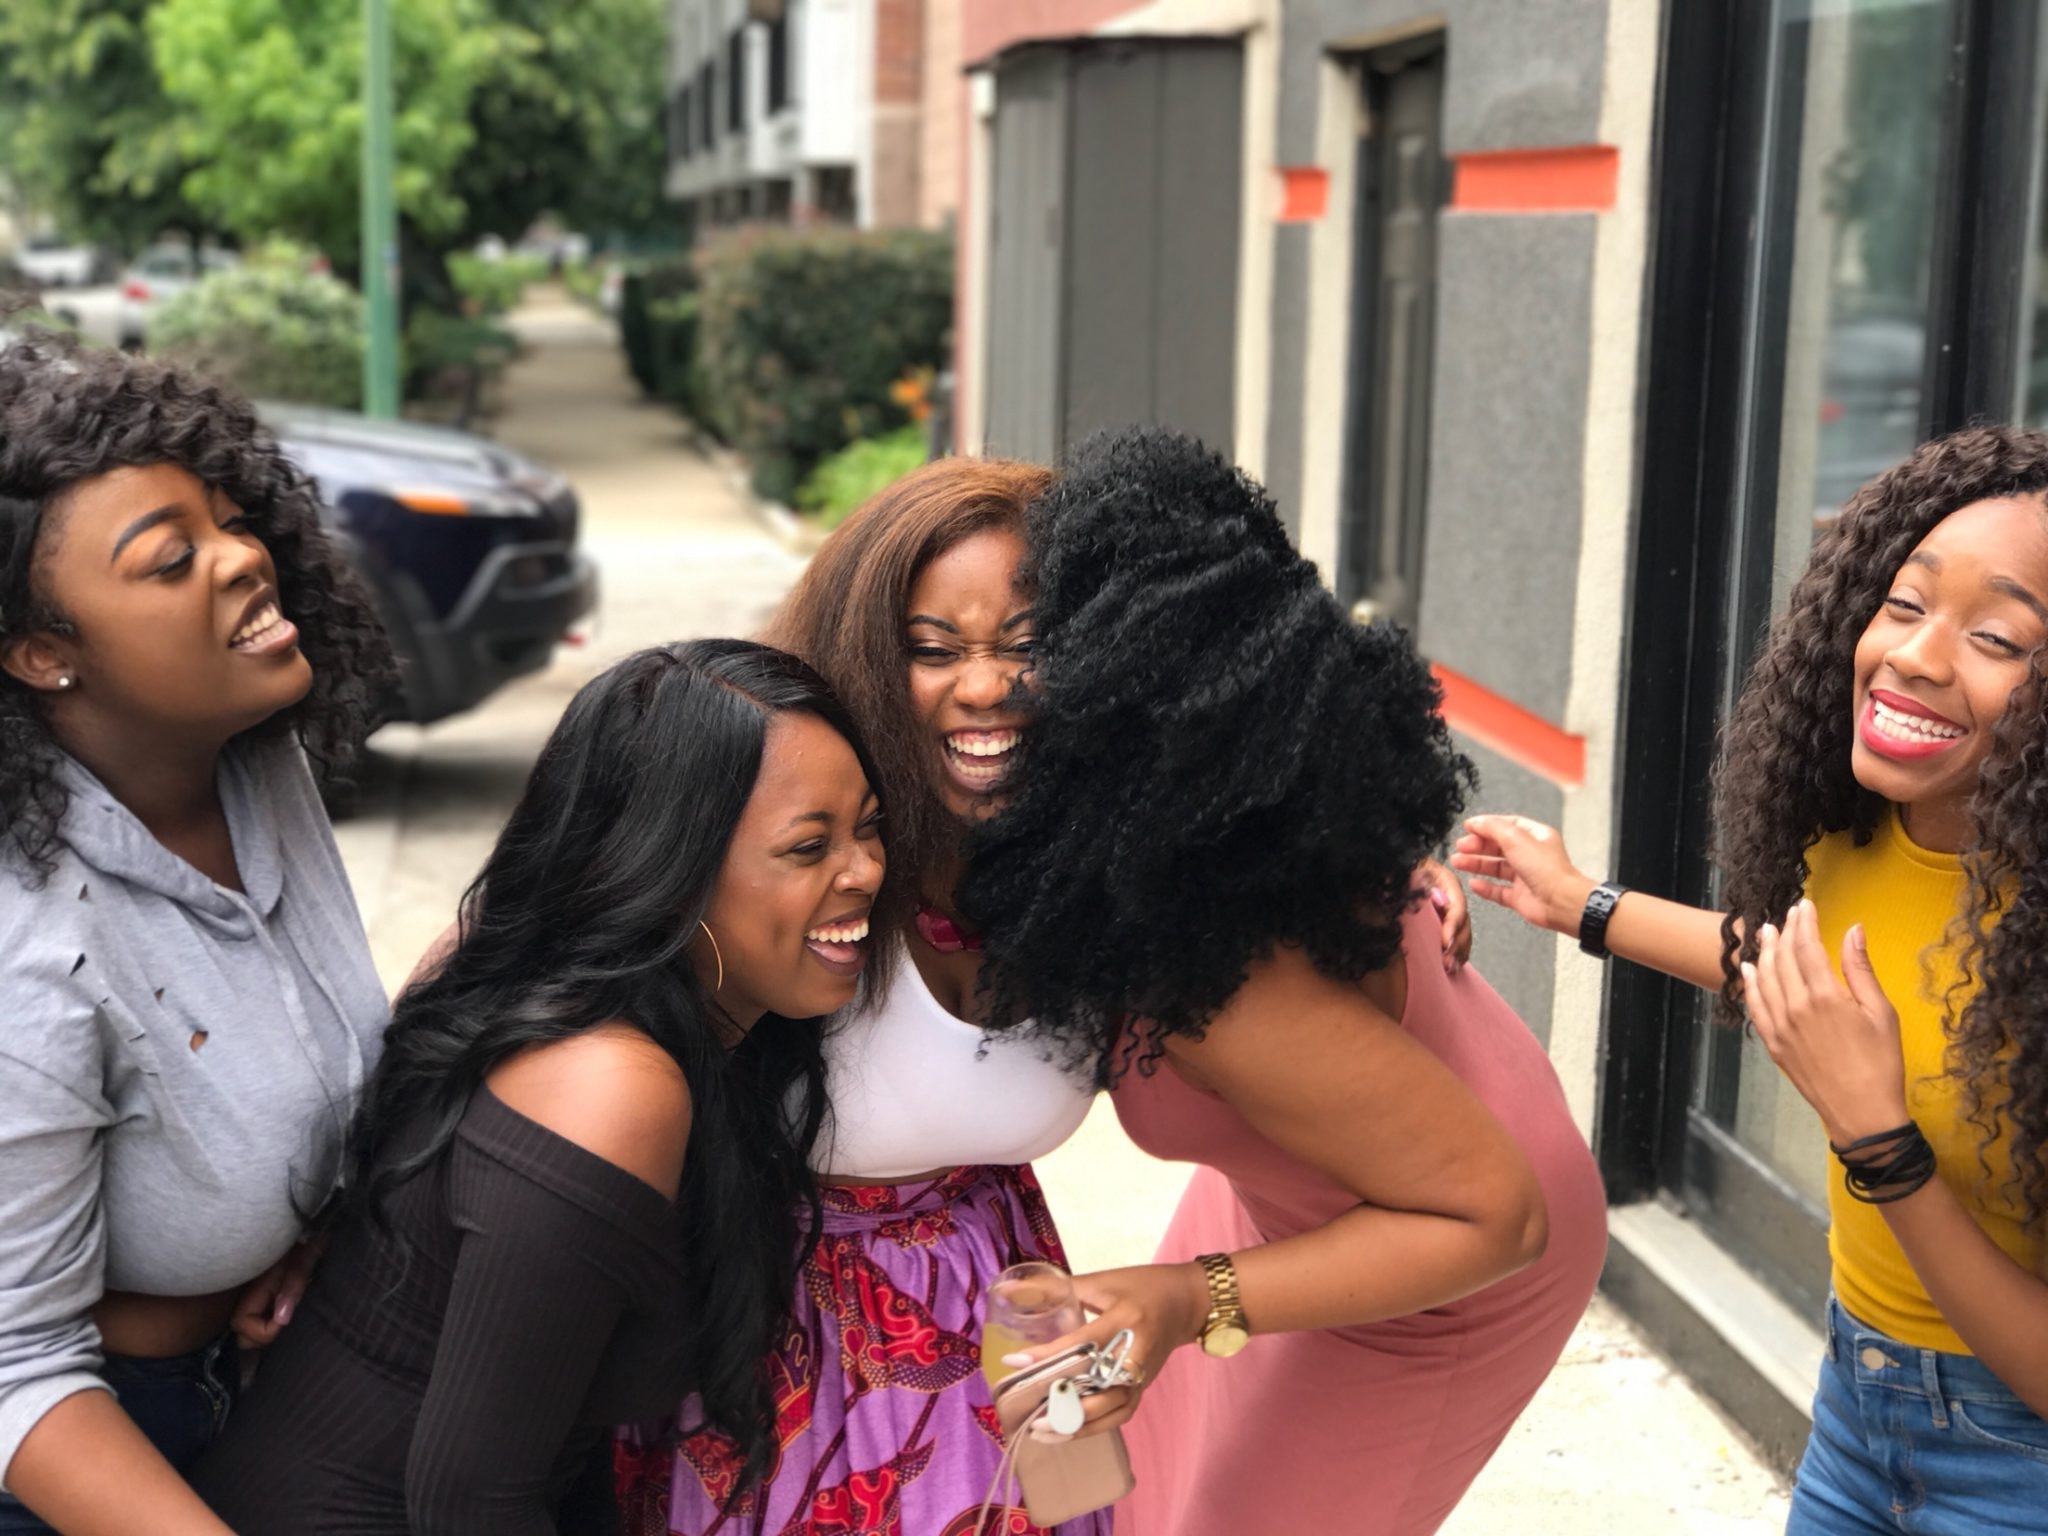 A group of Black women laughing together